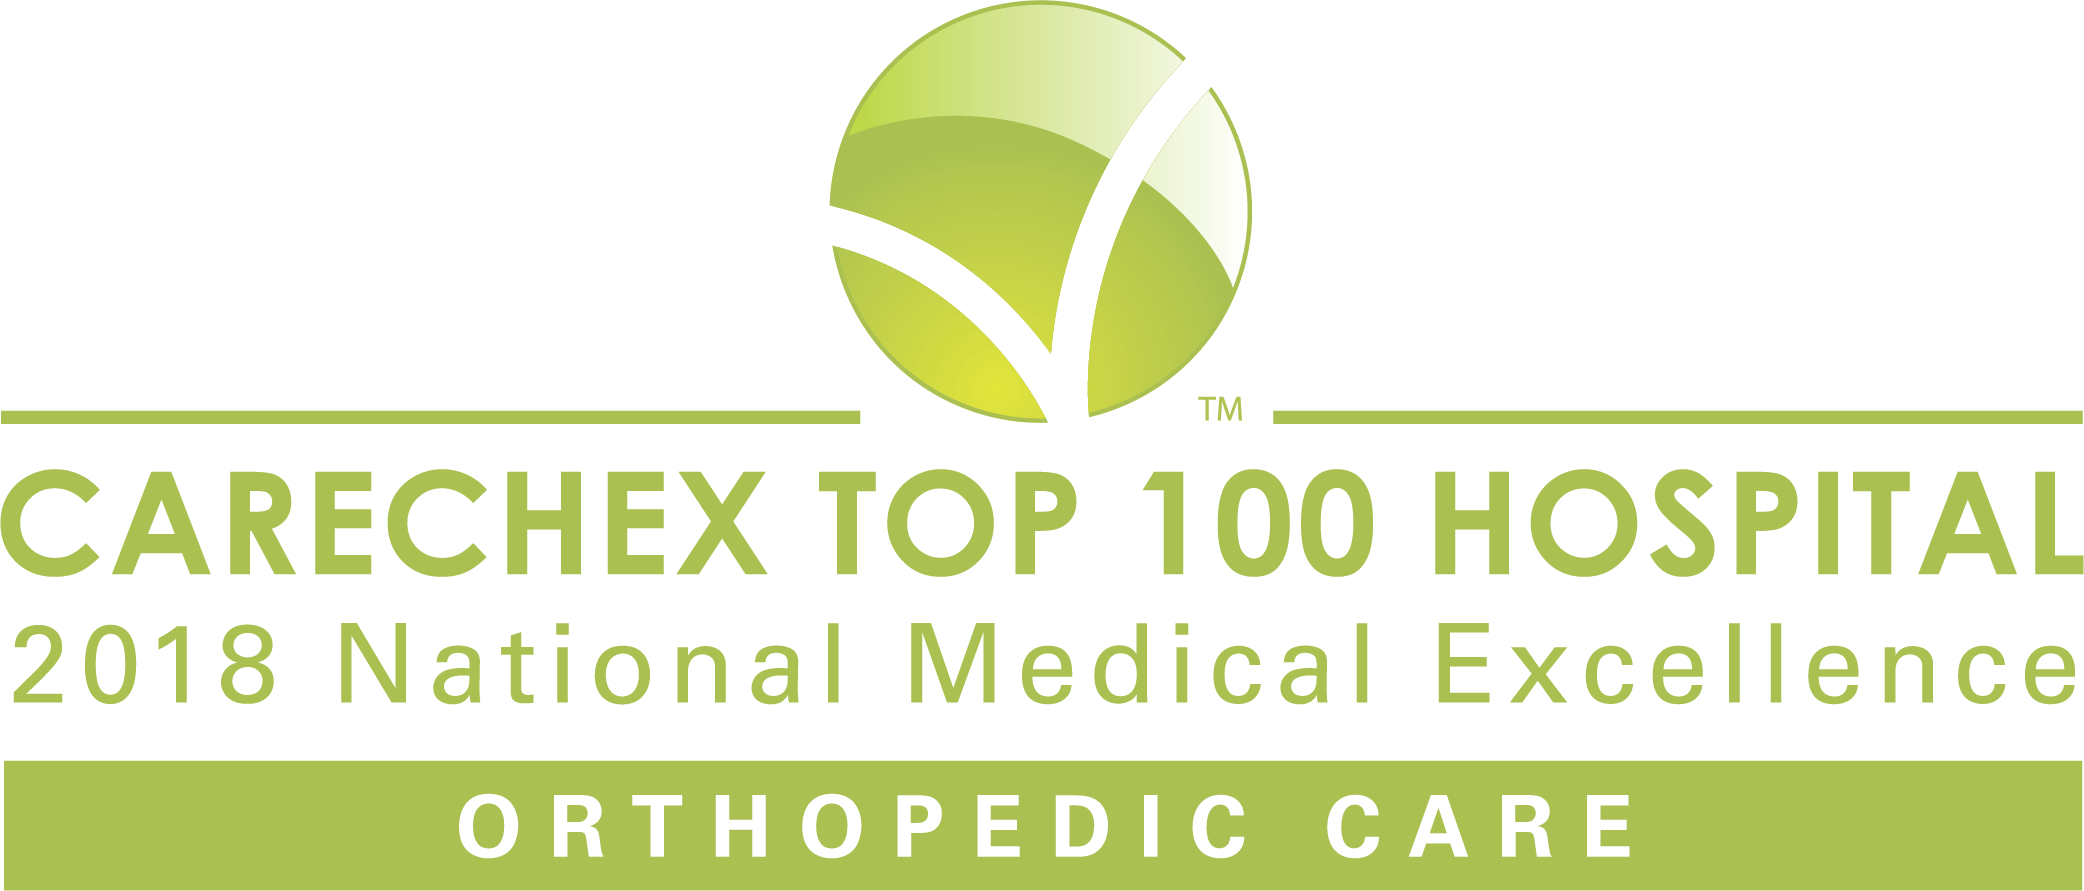 Williamson Medical Center CareChex Top 100 Hospital 2018 National Medical Excellence Orthopedic Care.